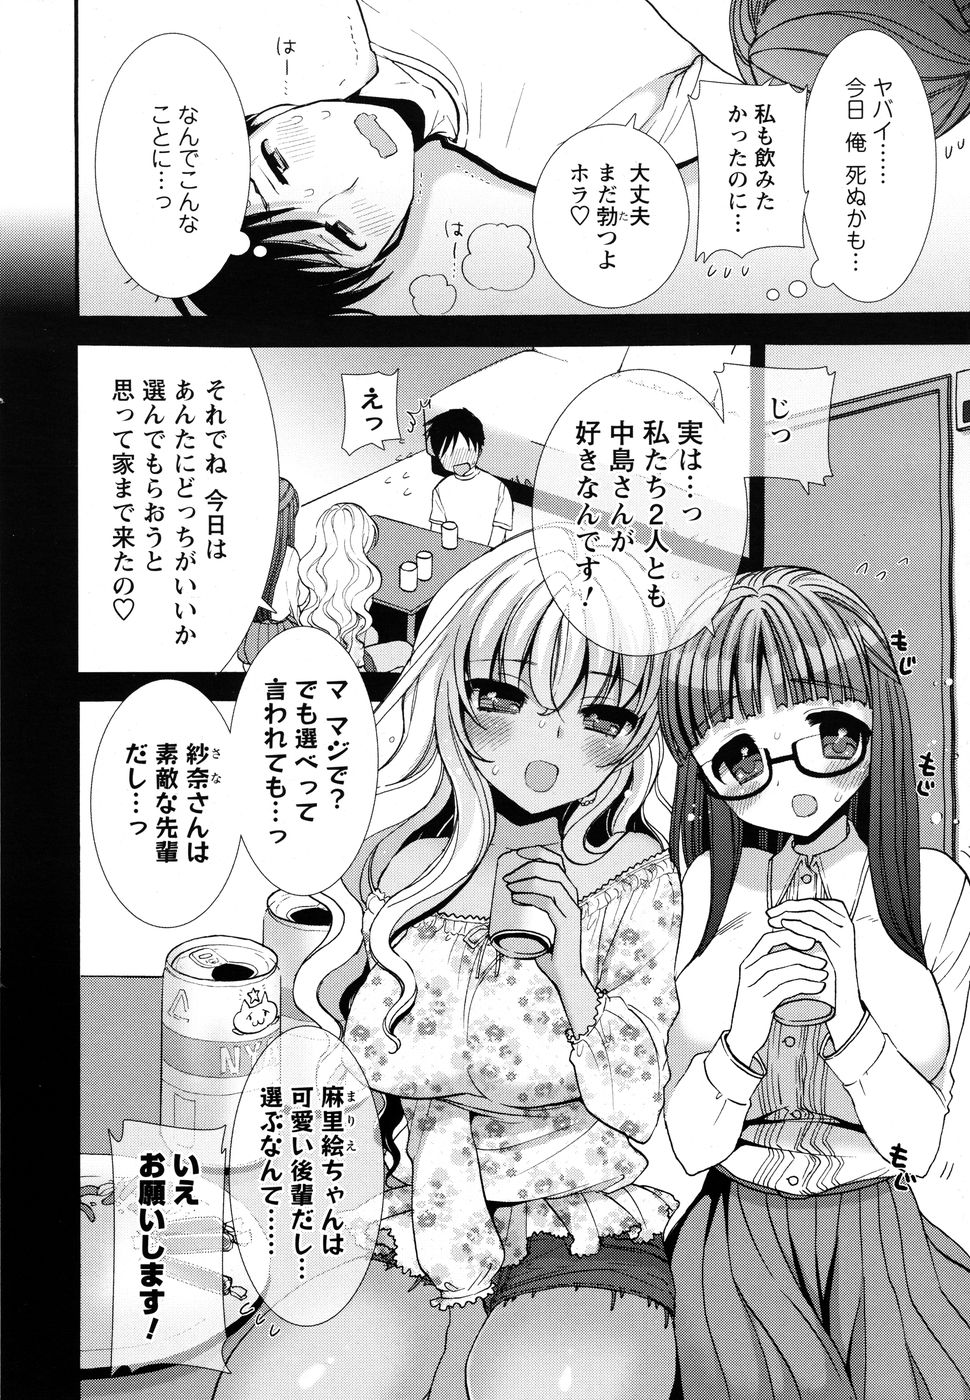 Men's Young Special Ikazuchi 2010-06 Vol. 14 page 13 full